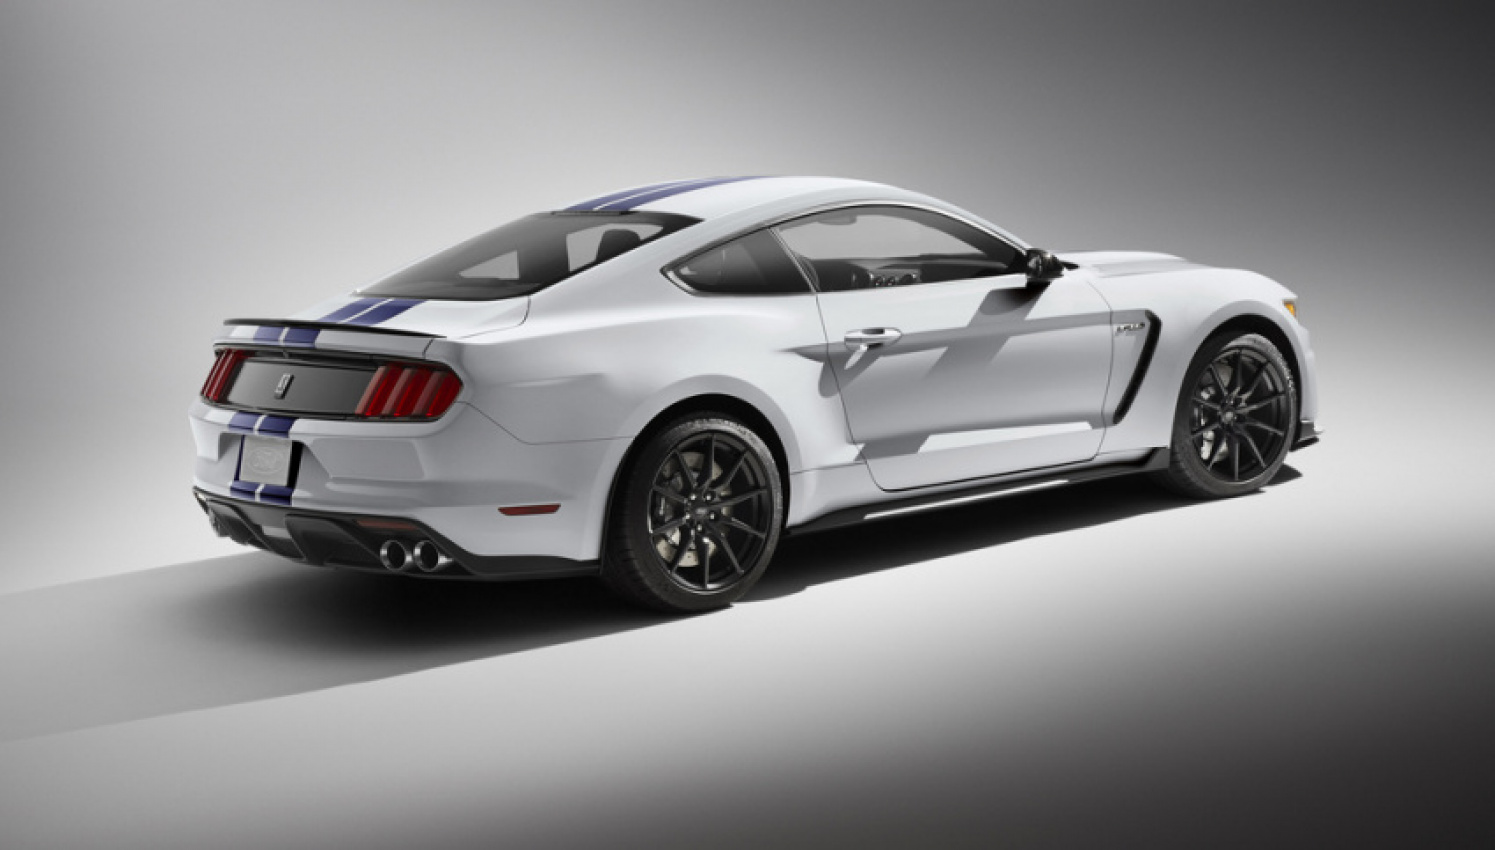 autos, cars, review, shelby, 2010s cars, 500-600hp, aftermarket, best of the best, ford, ford mustang, gt350, muscle, muscle car, professionally tuned car, shelby model in depth, shelby mustang, tuned ford, tuned mustang, 2015 shelby gt350